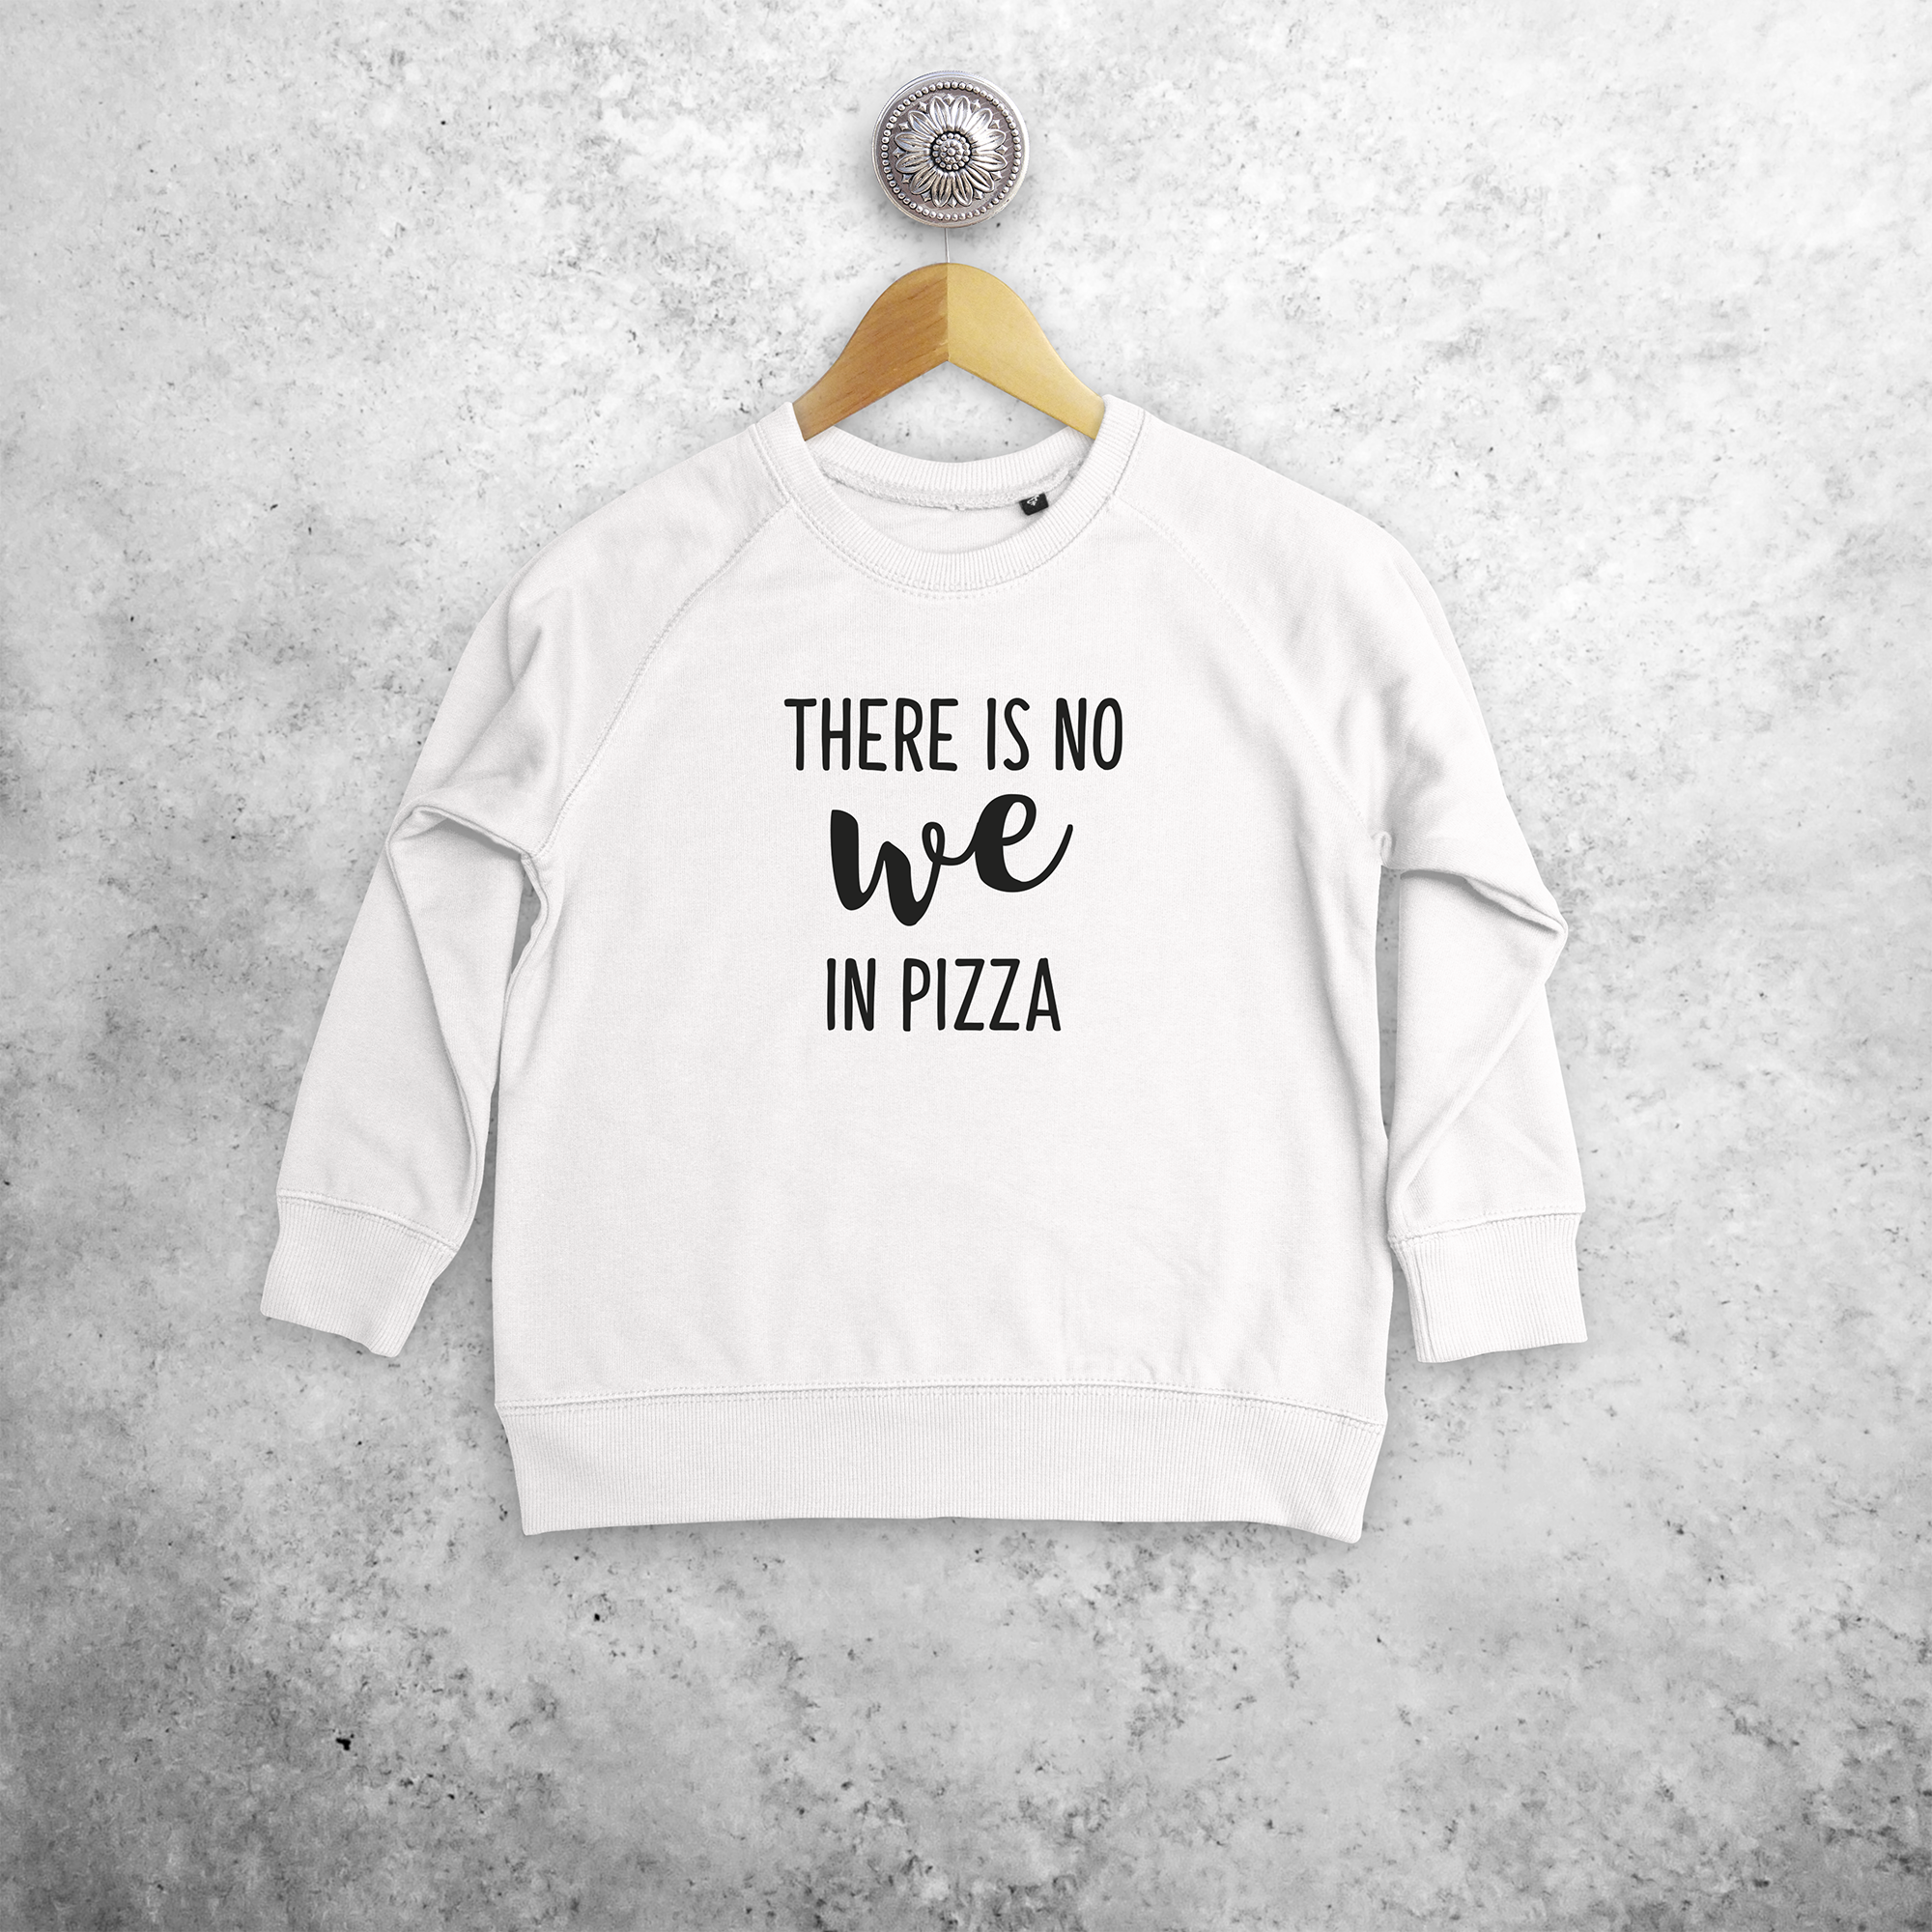 'There is no we in pizza' kids sweater